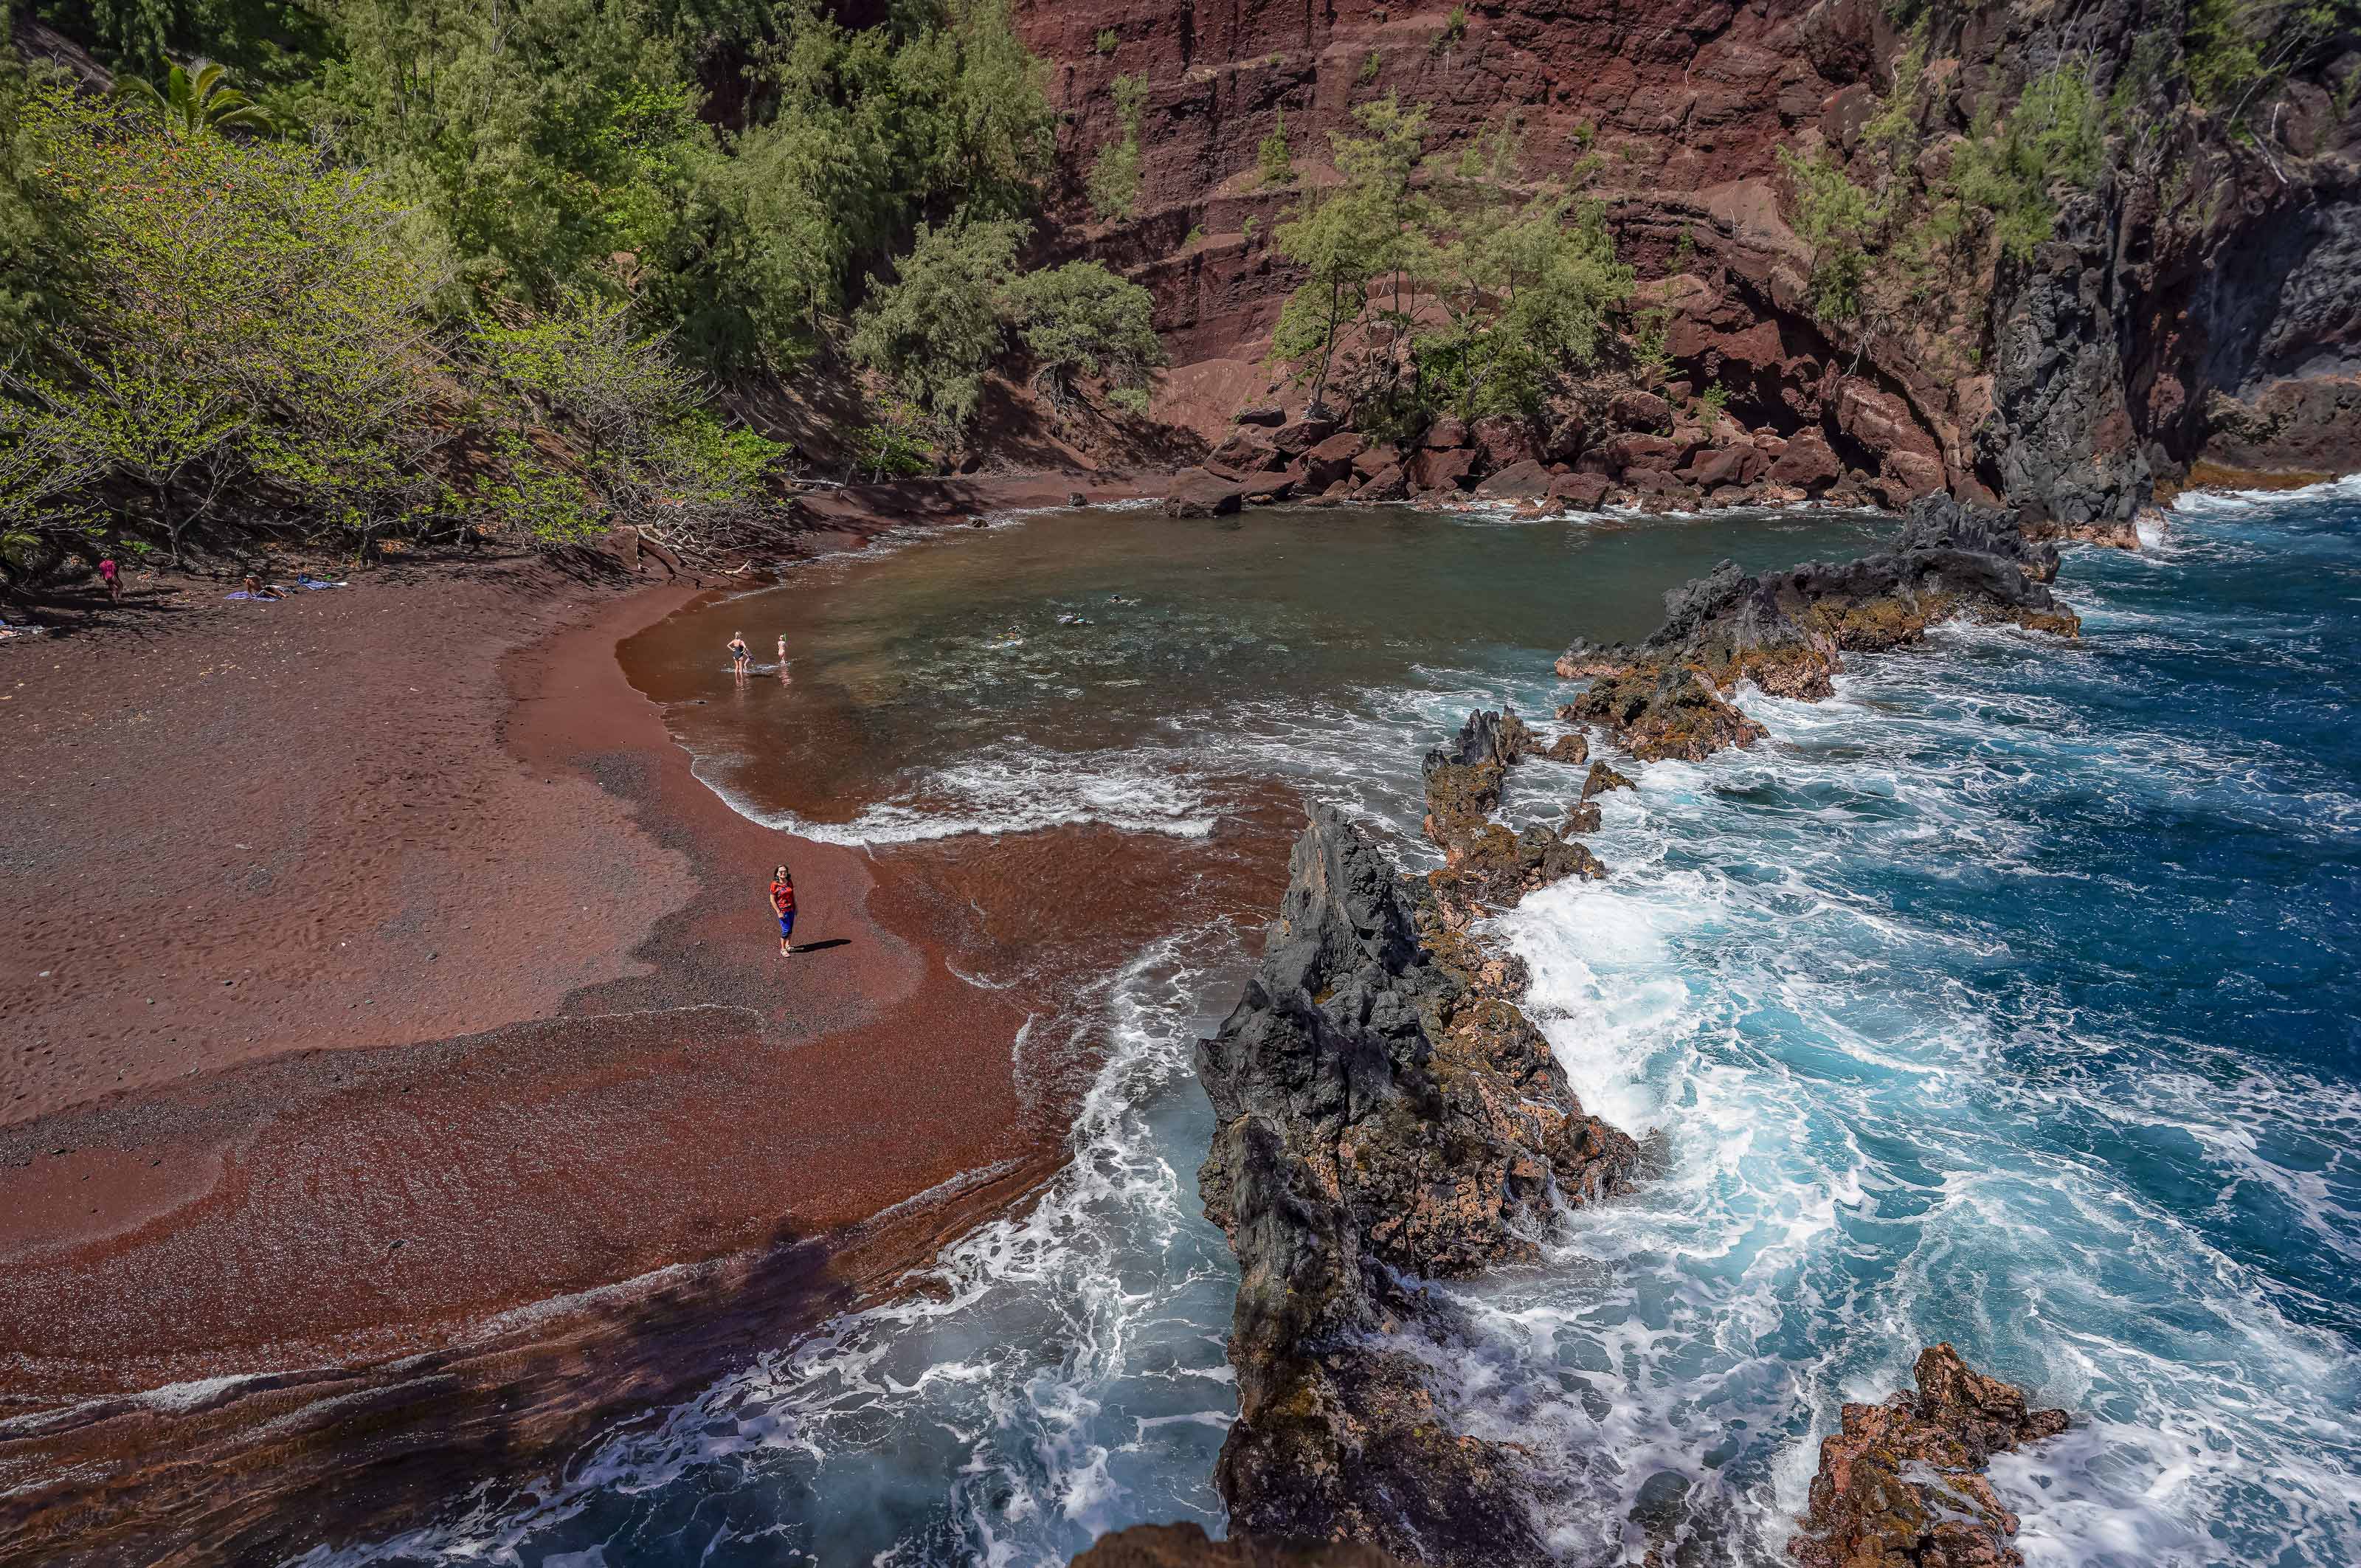 Kaihalulu Red Sand Beach in Hawaii by Quang Phan